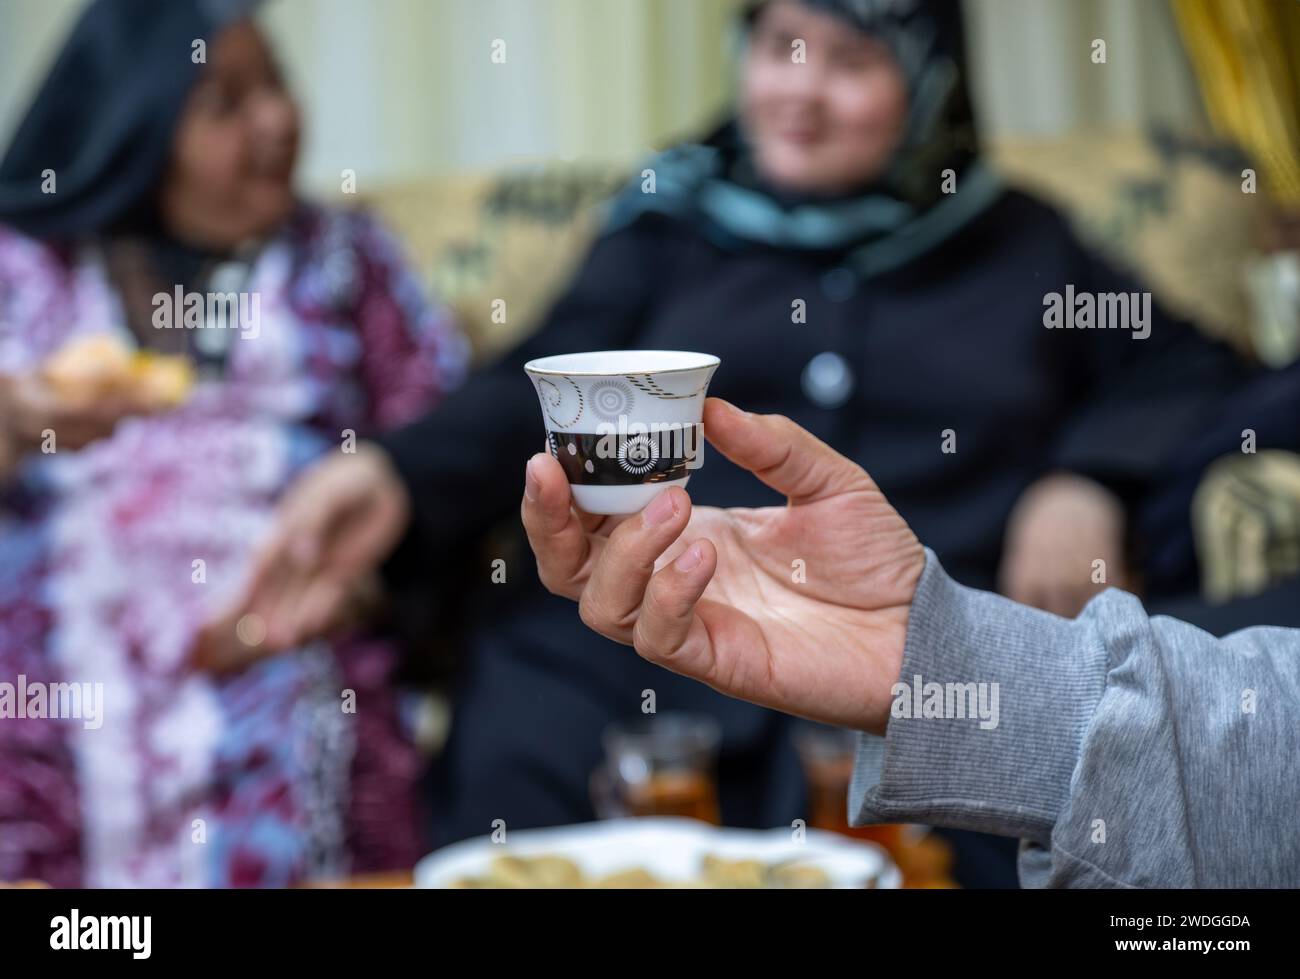 hand holding coffee cup with family in the background Stock Photo